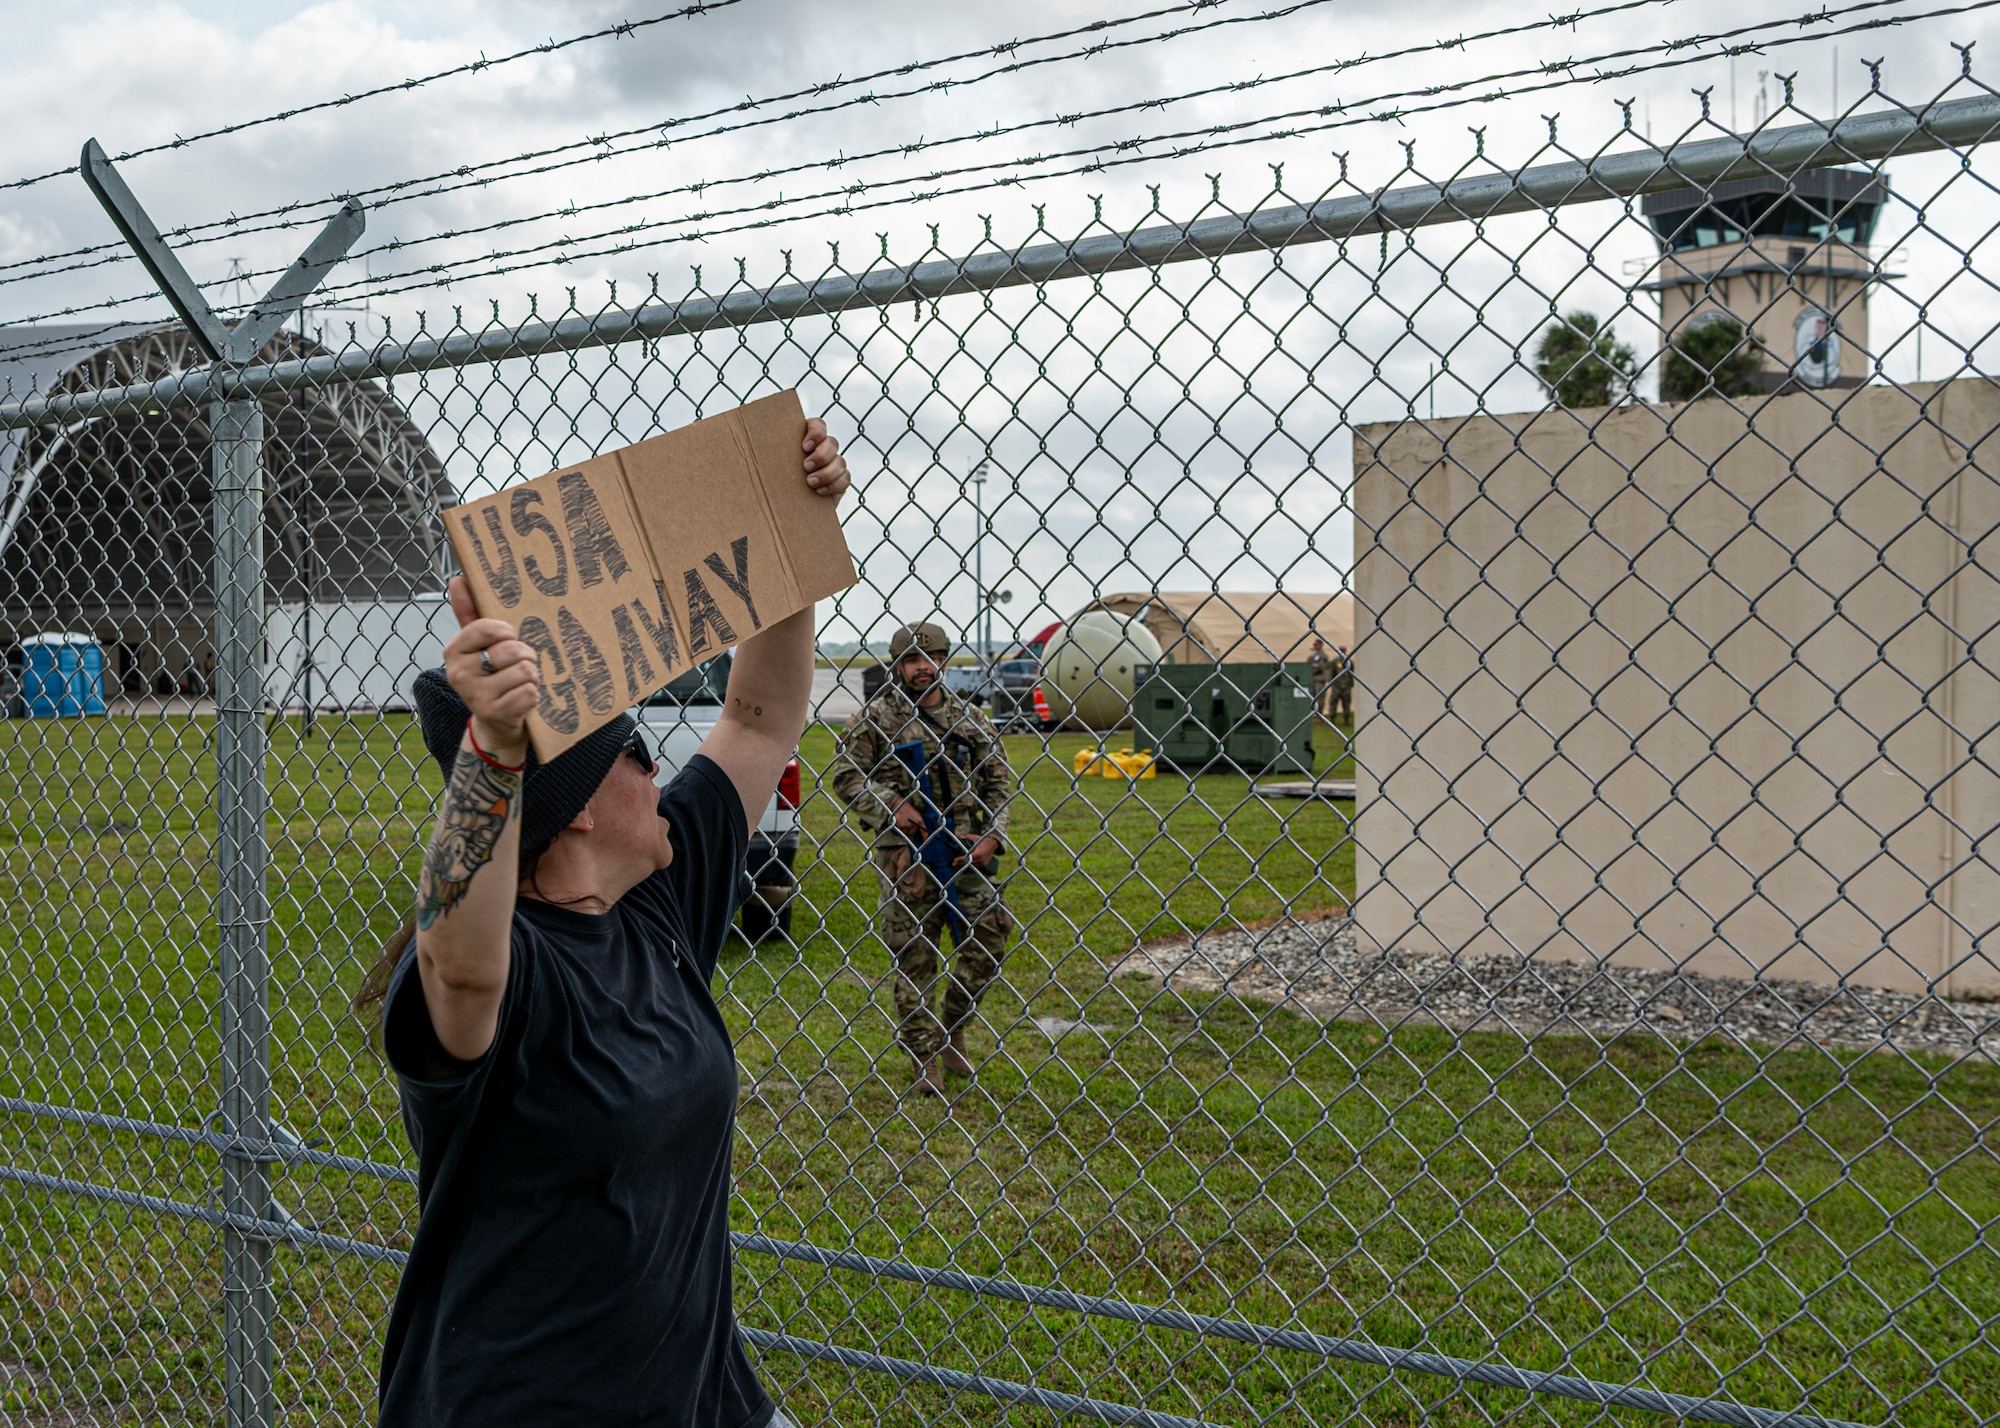 A person wearing all black clothes holds a sign, "USA GO AWAY" outside of a gate, simulating protest.